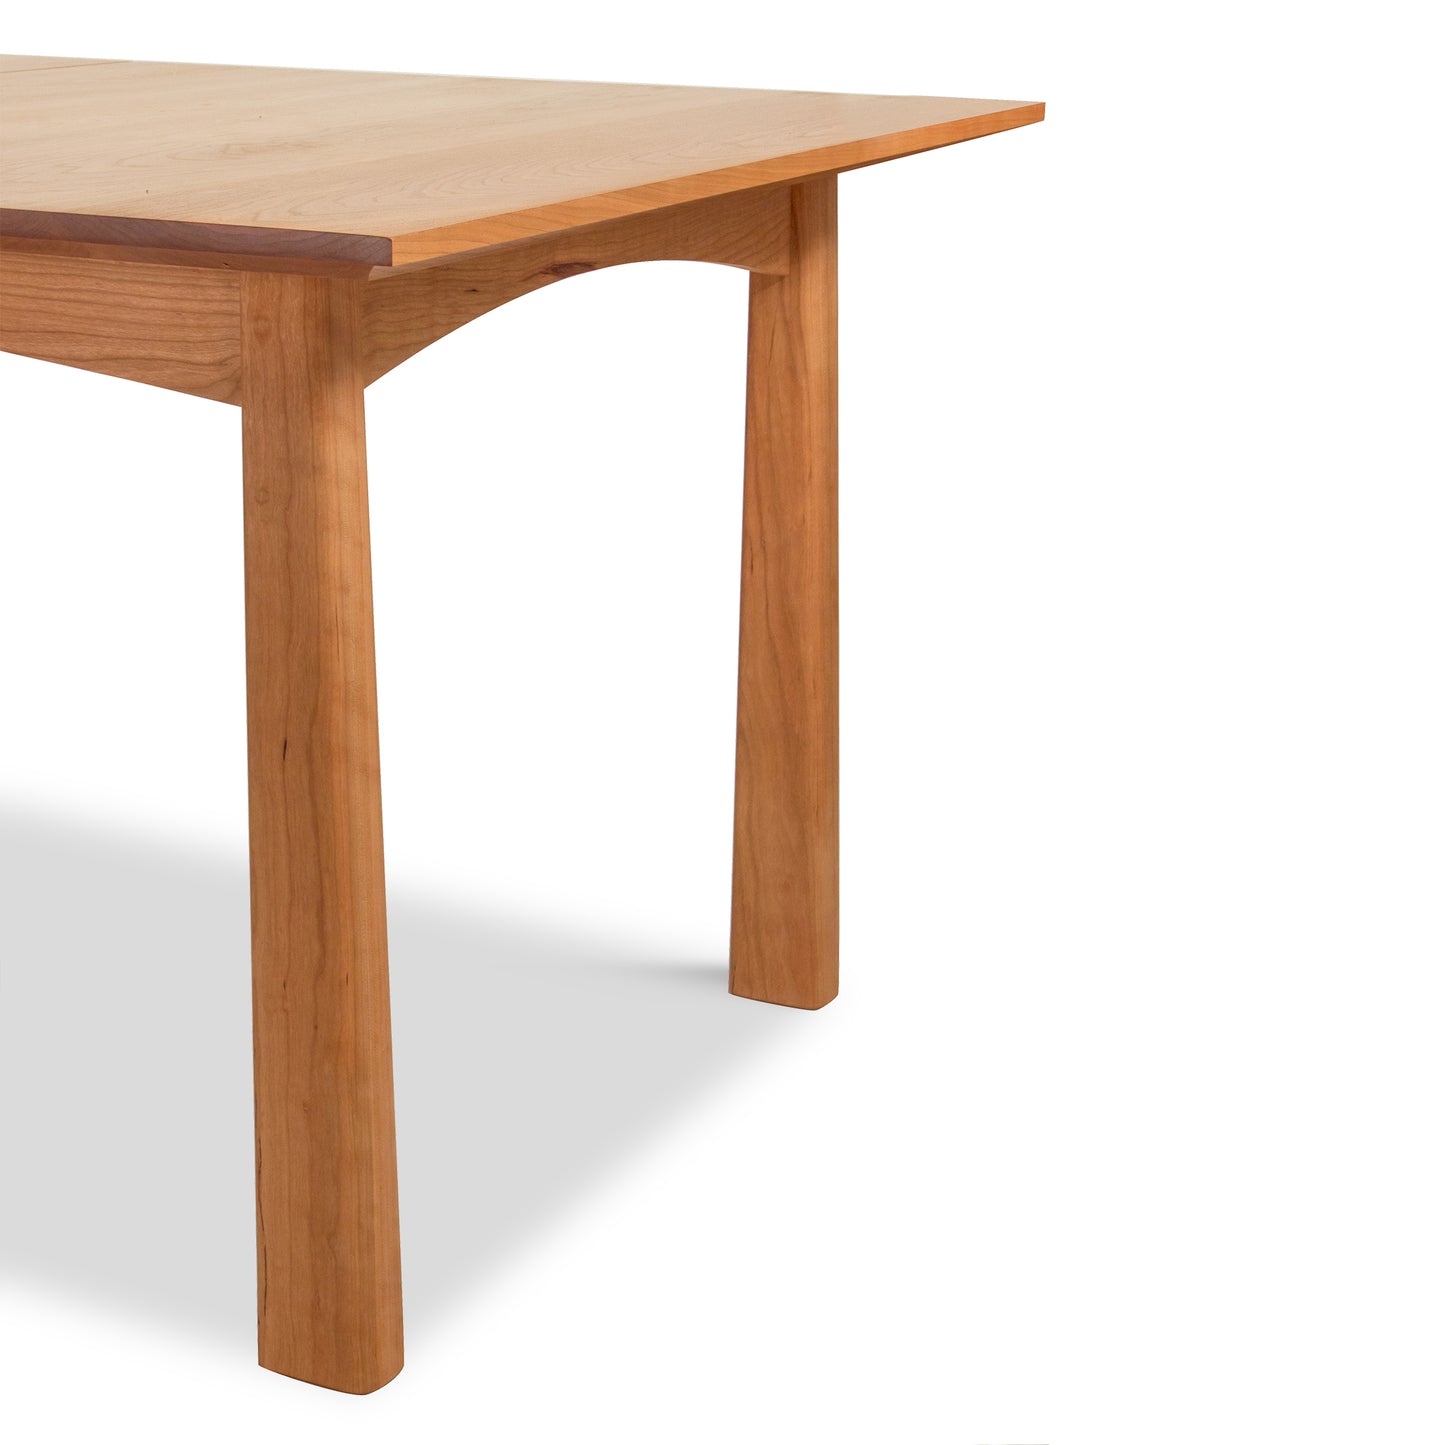 A simple Arts & Crafts style Cherry Moon Extension Dining Table with a smooth top and sturdy legs, shown against a white background, with its corner facing the viewer, by Maple Corner Woodworks.